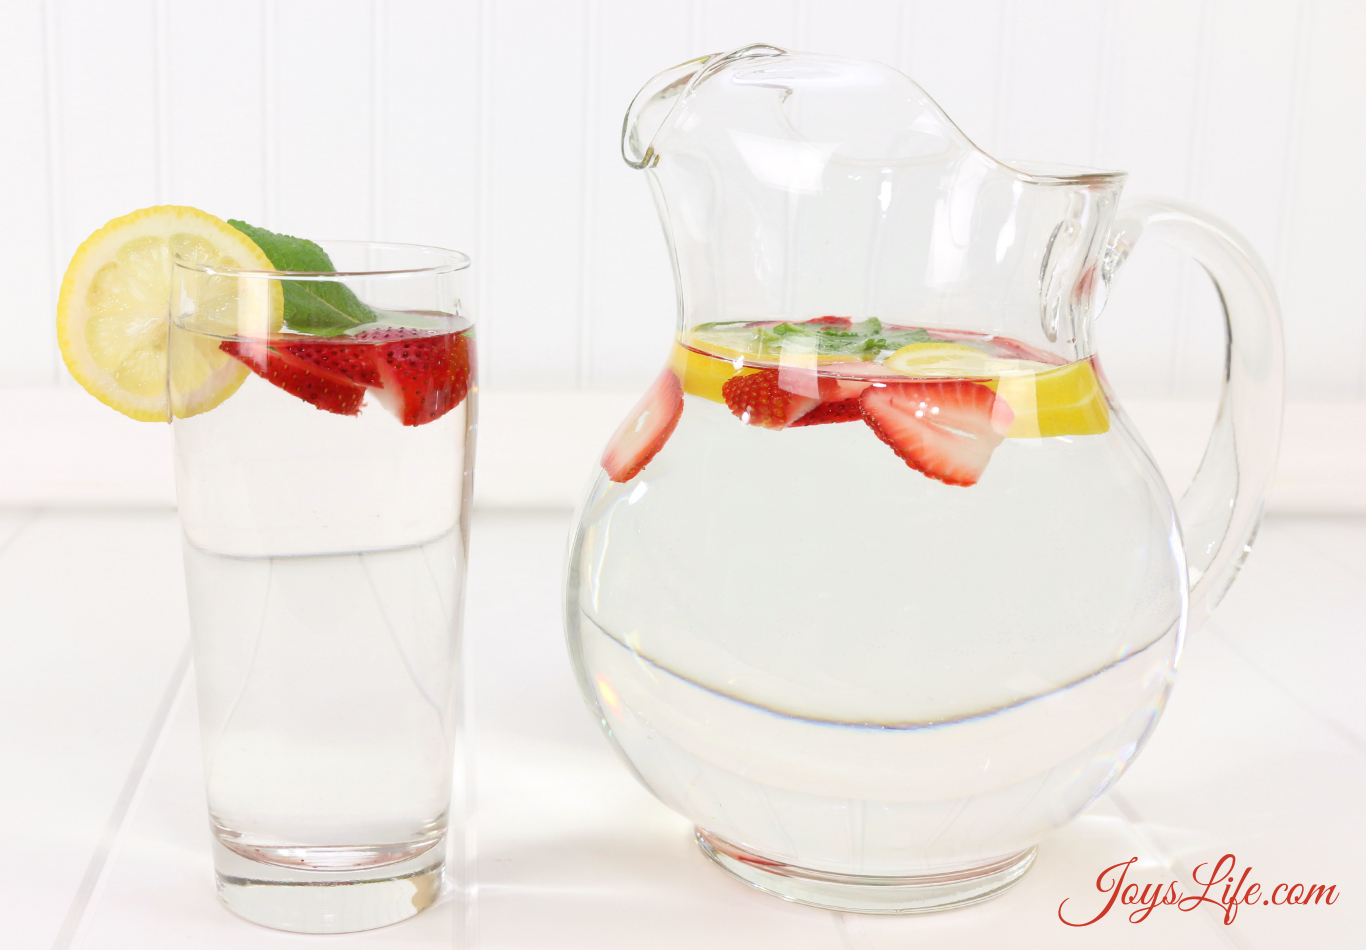 Enjoy Fruit Infused Water & Ice with less Tooth Sensitivity #AmopeLovesMoms #infusedwater #recipe #Ad